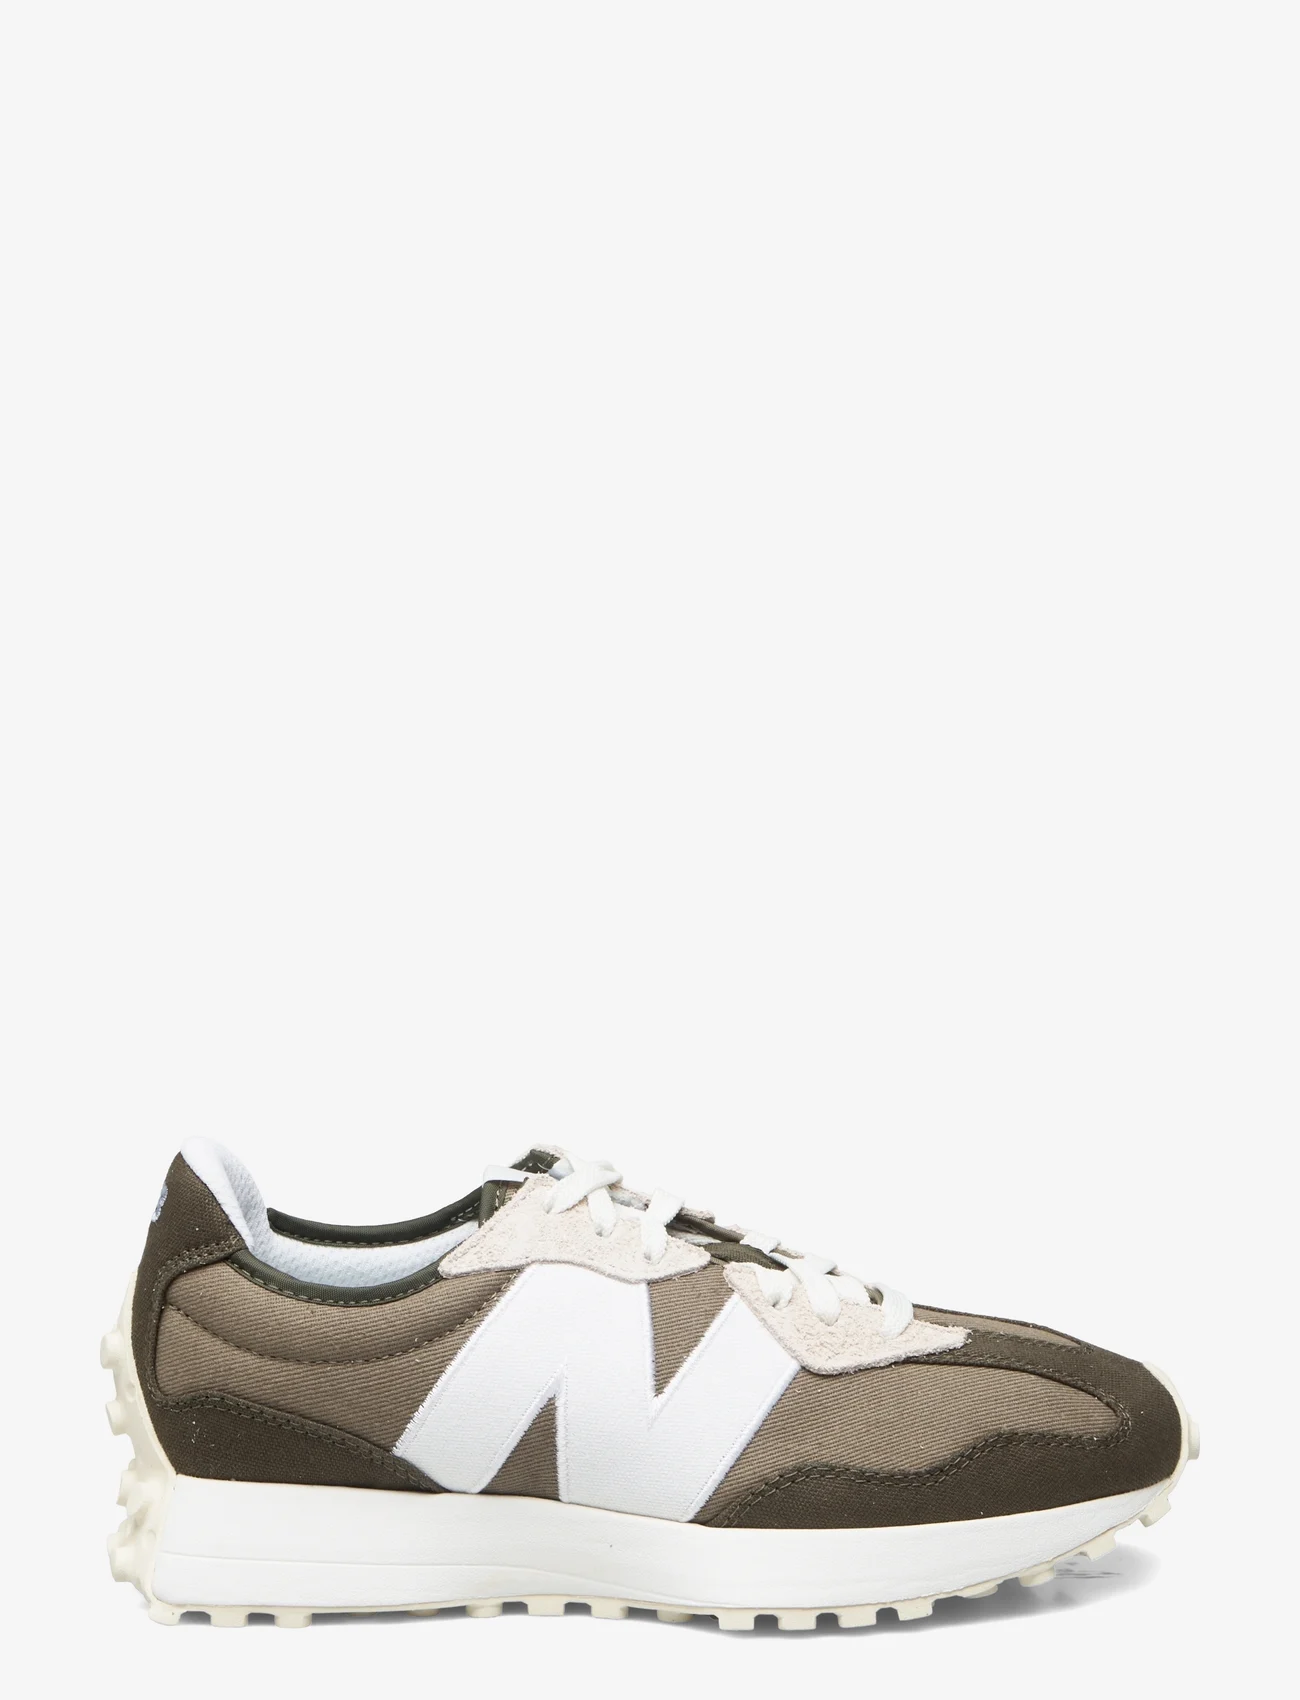 New Balance - New Balance 327 - low tops - military olive - 1